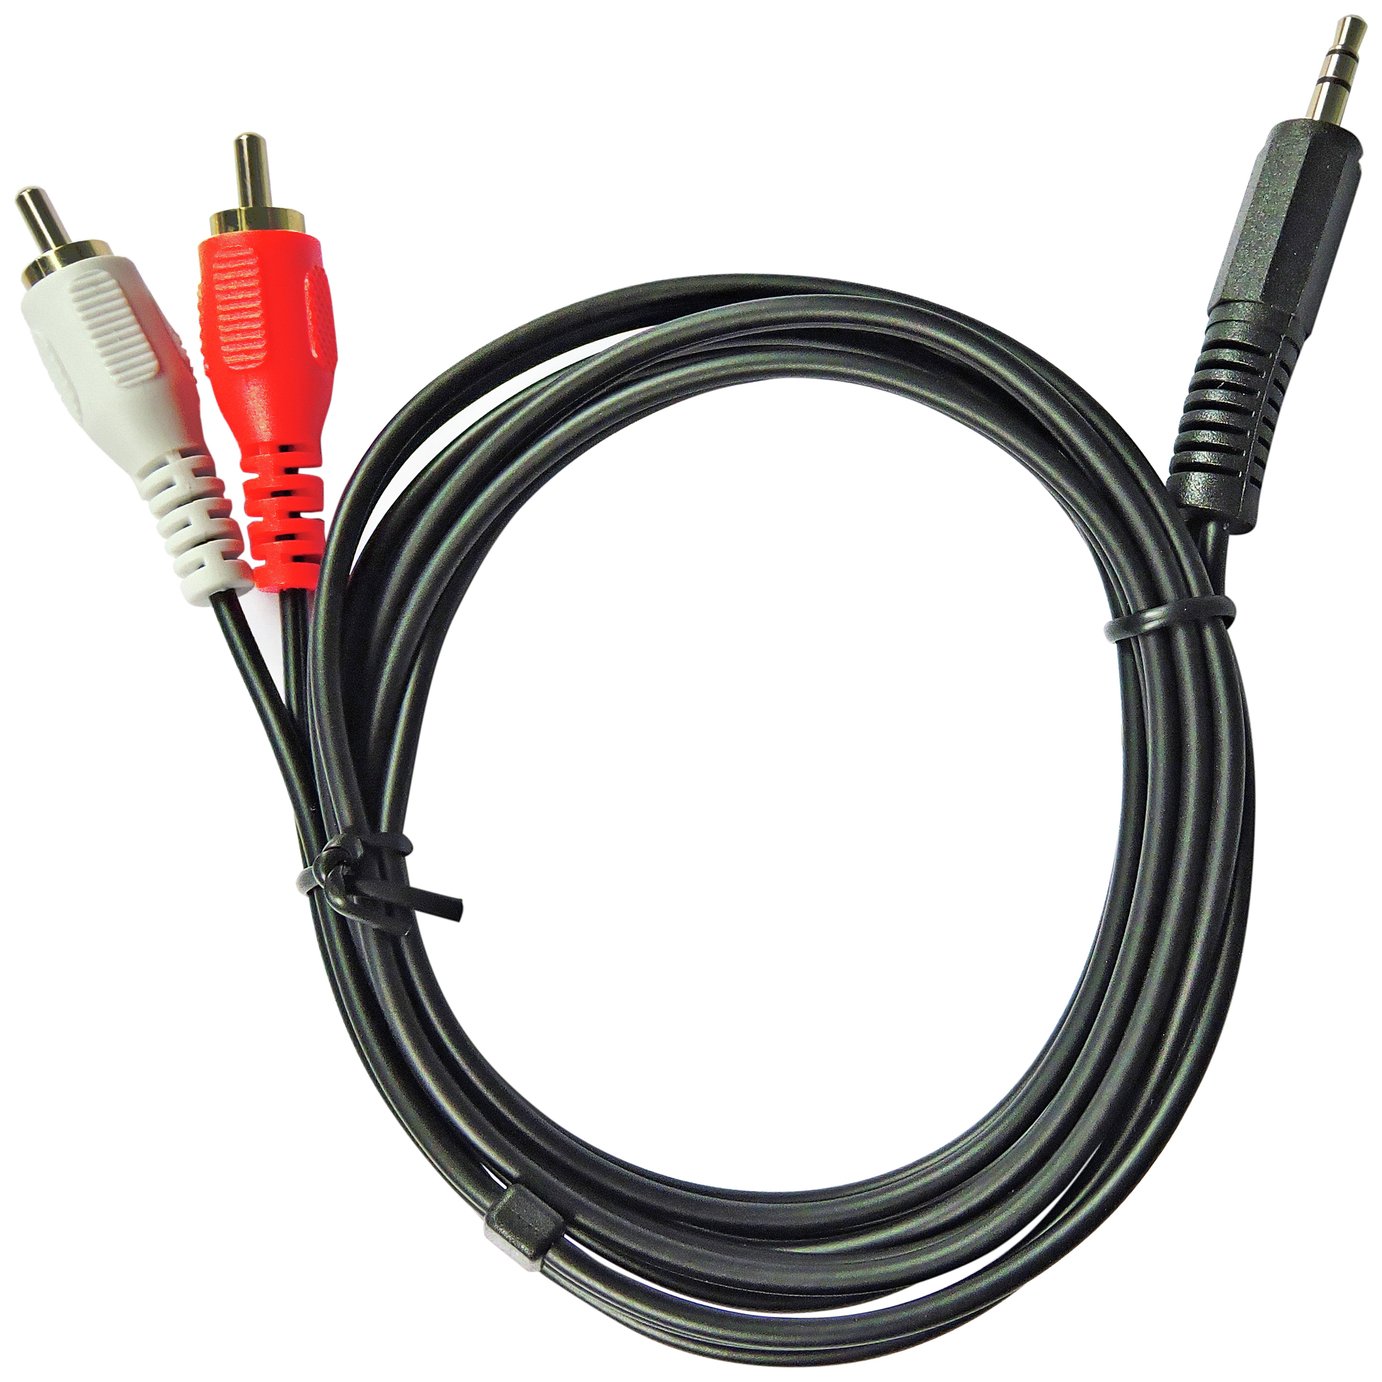 3.5mm Jack to Stereo RCA Cable Review